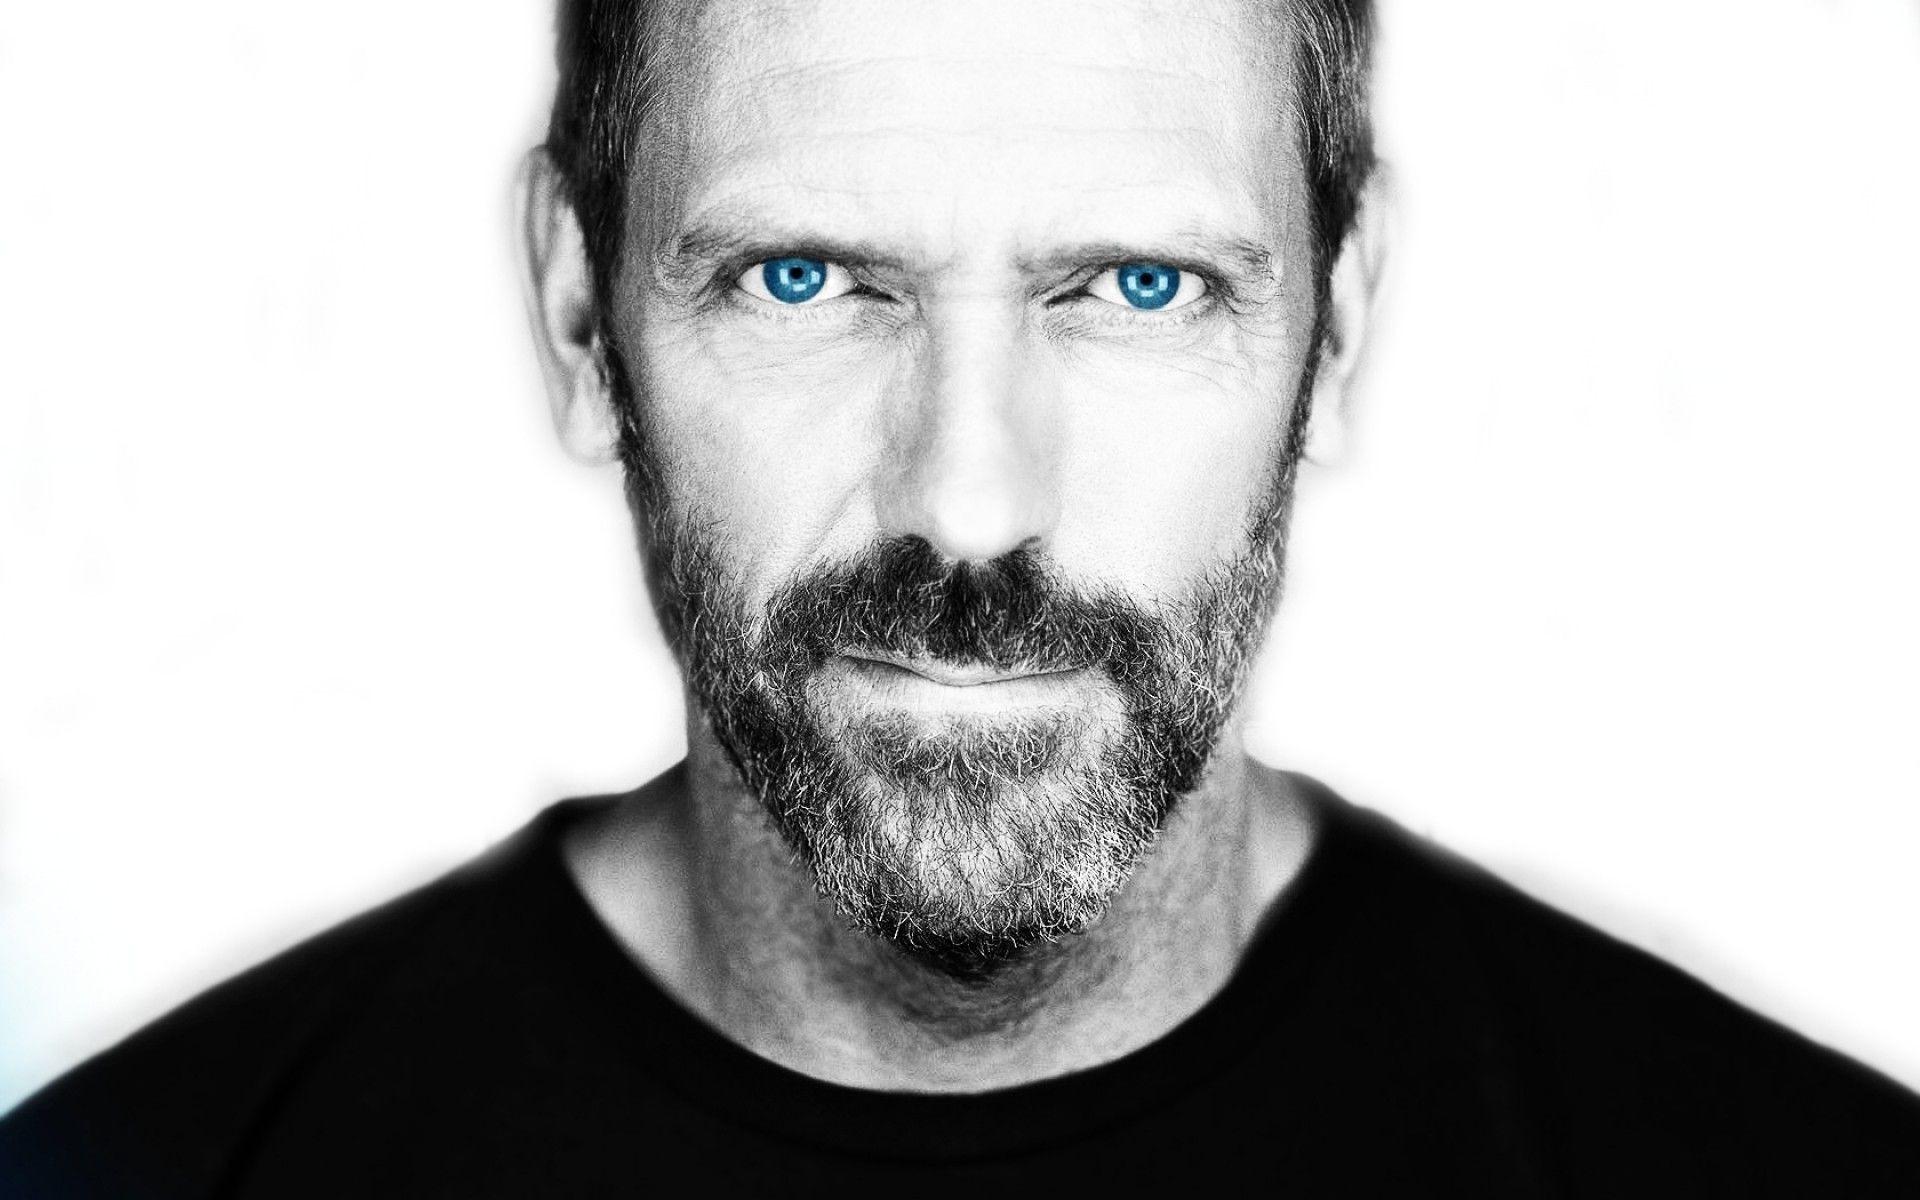 hugh laurie gregory house wallpaper and background